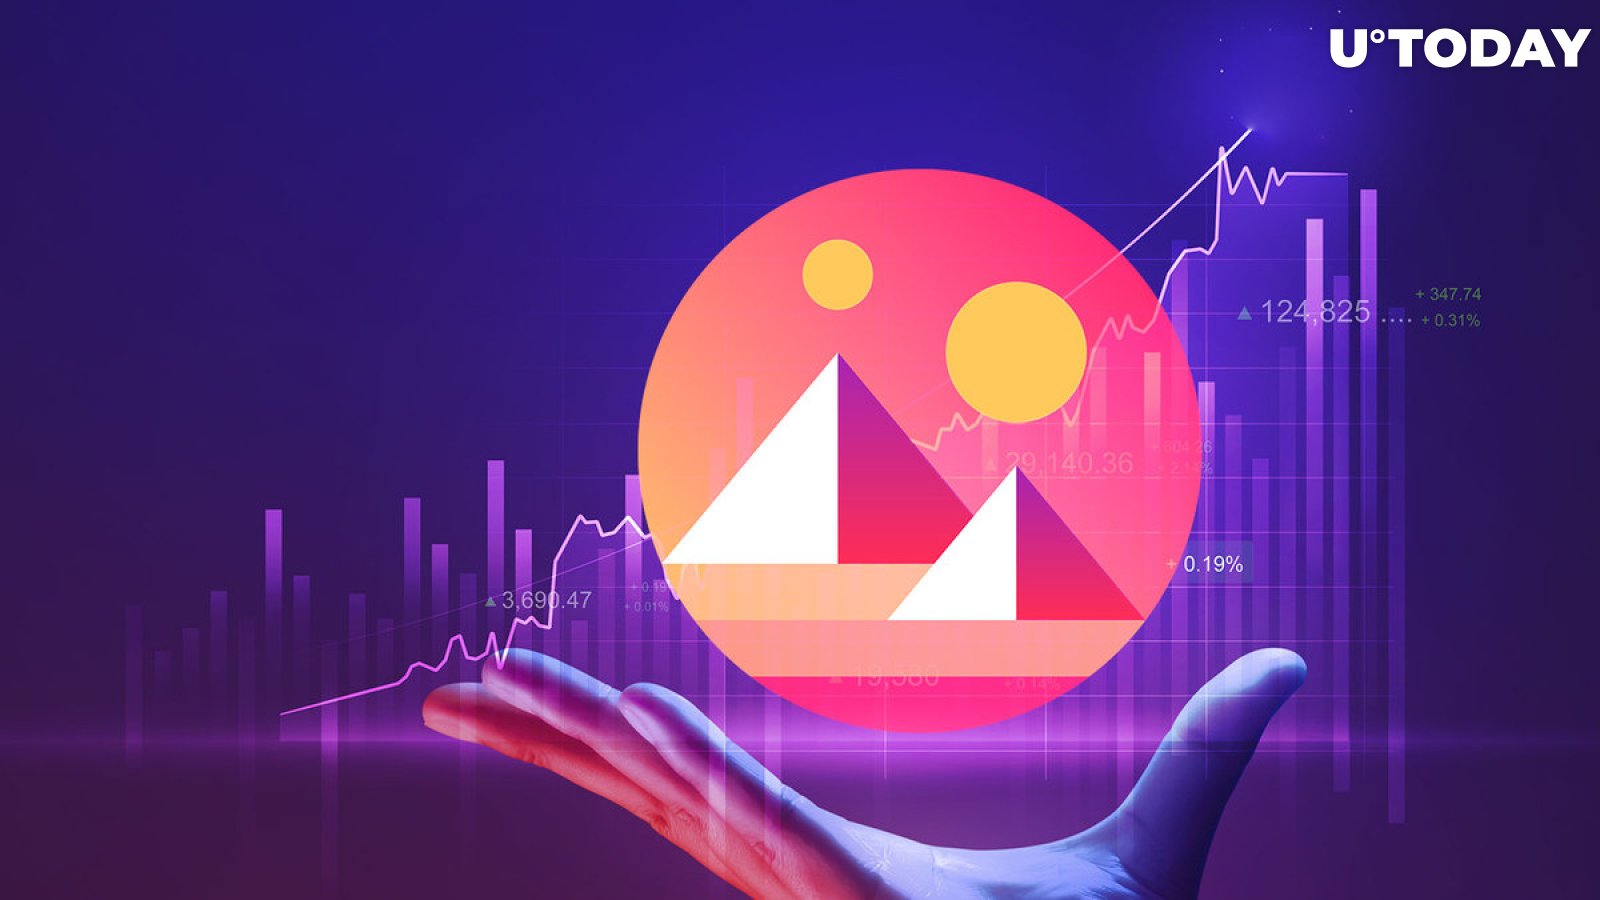 Decentraland (MANA) up 6% to Maintain Its Rally, Here Are 2 Price Levels to Watch